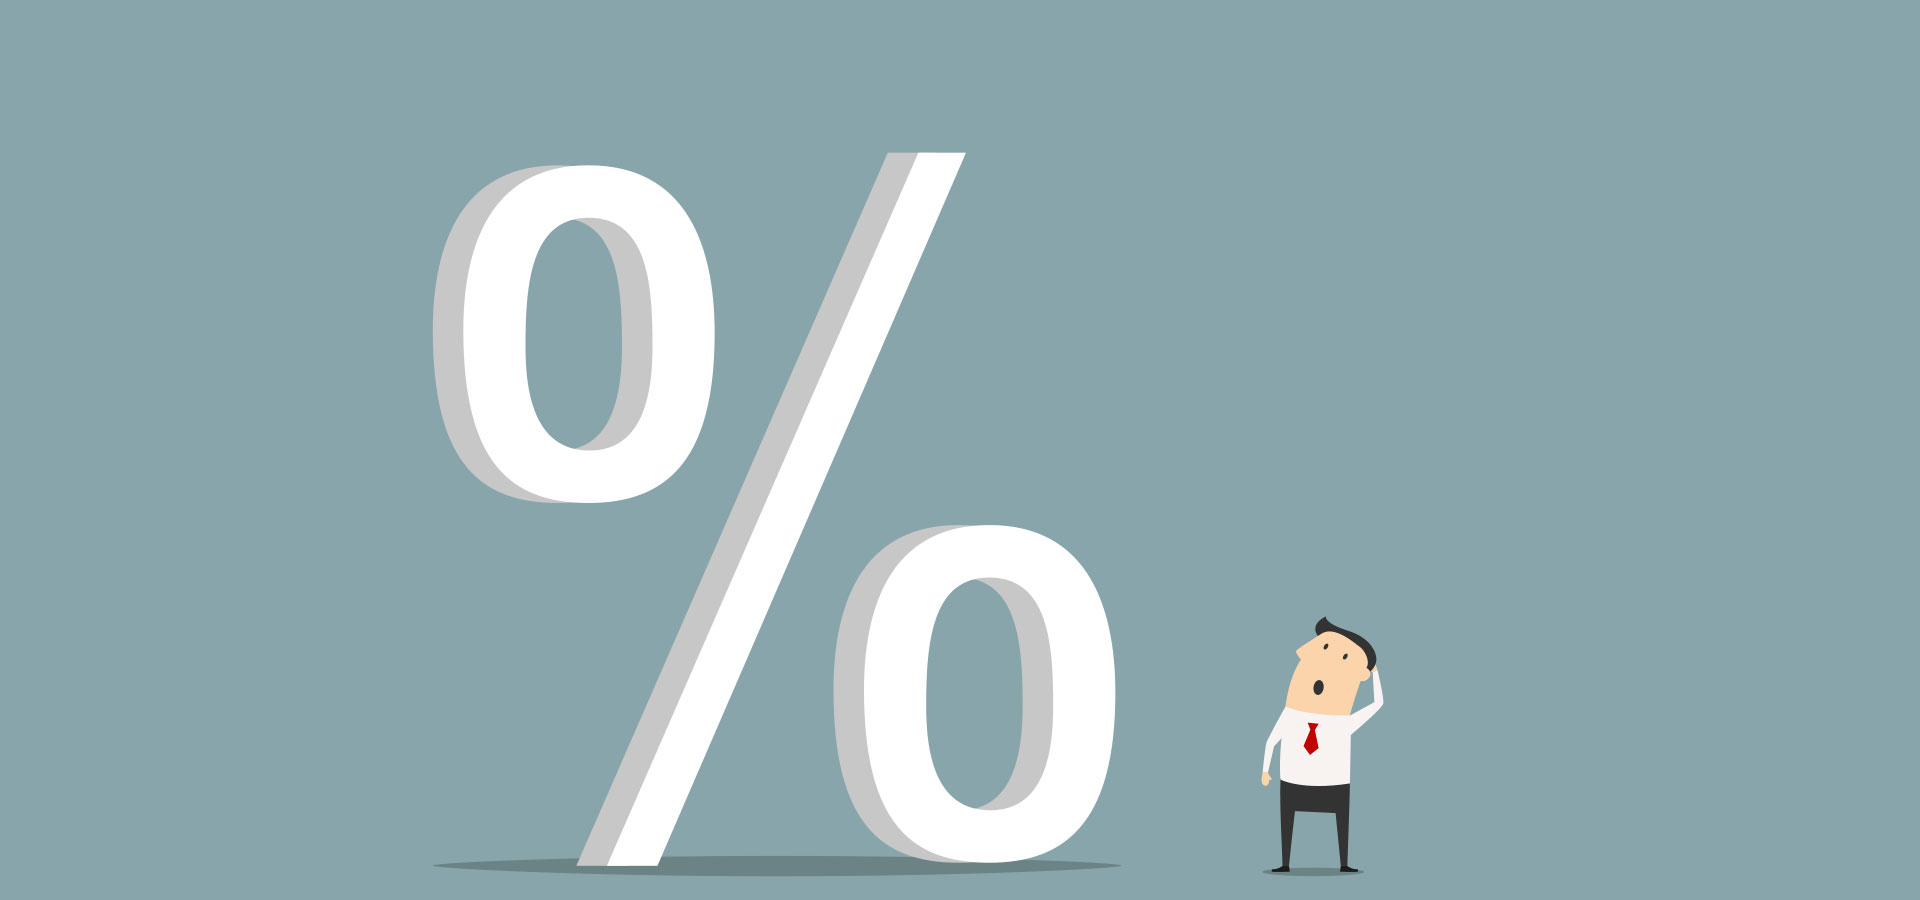 Reduce your loan rate by 2%*